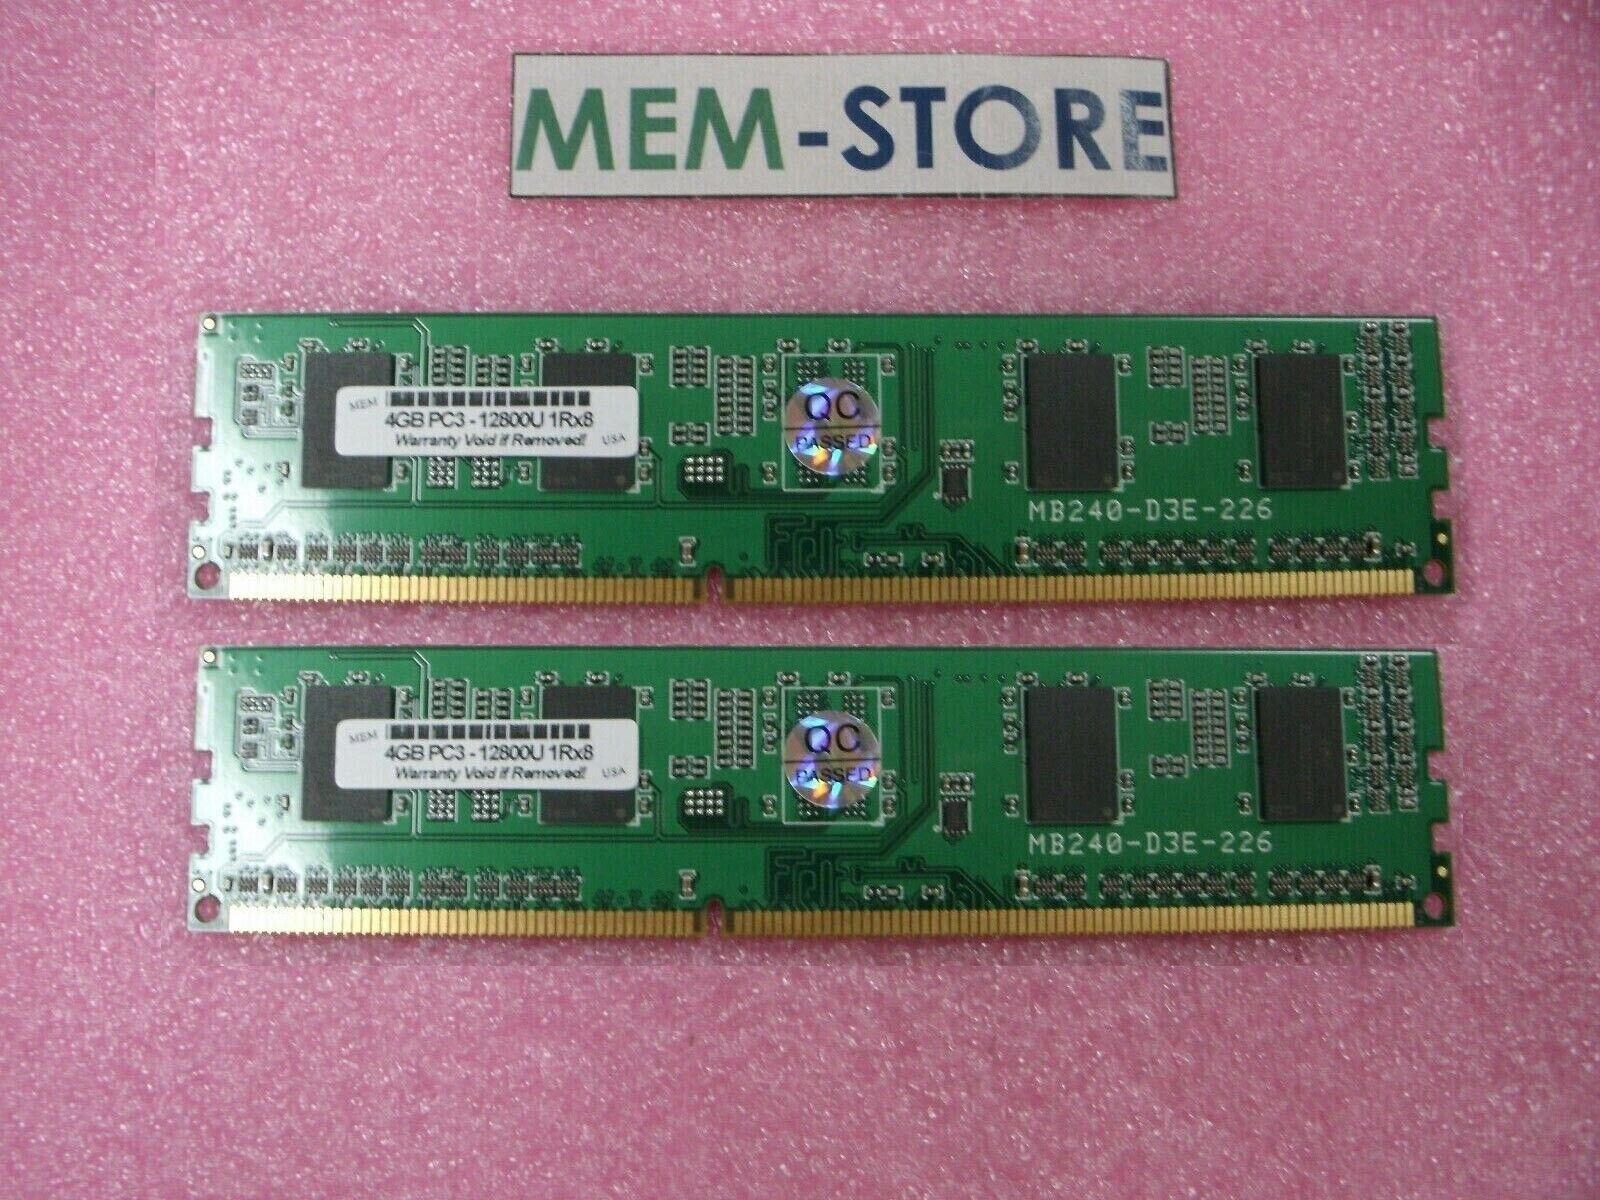 8GB (2x4GB) DDR3 1600MHz UDIMM Kingston KVR16N11S8K2/8 Equivalent Desktop Memory (3rd Party) - image 1 of 1